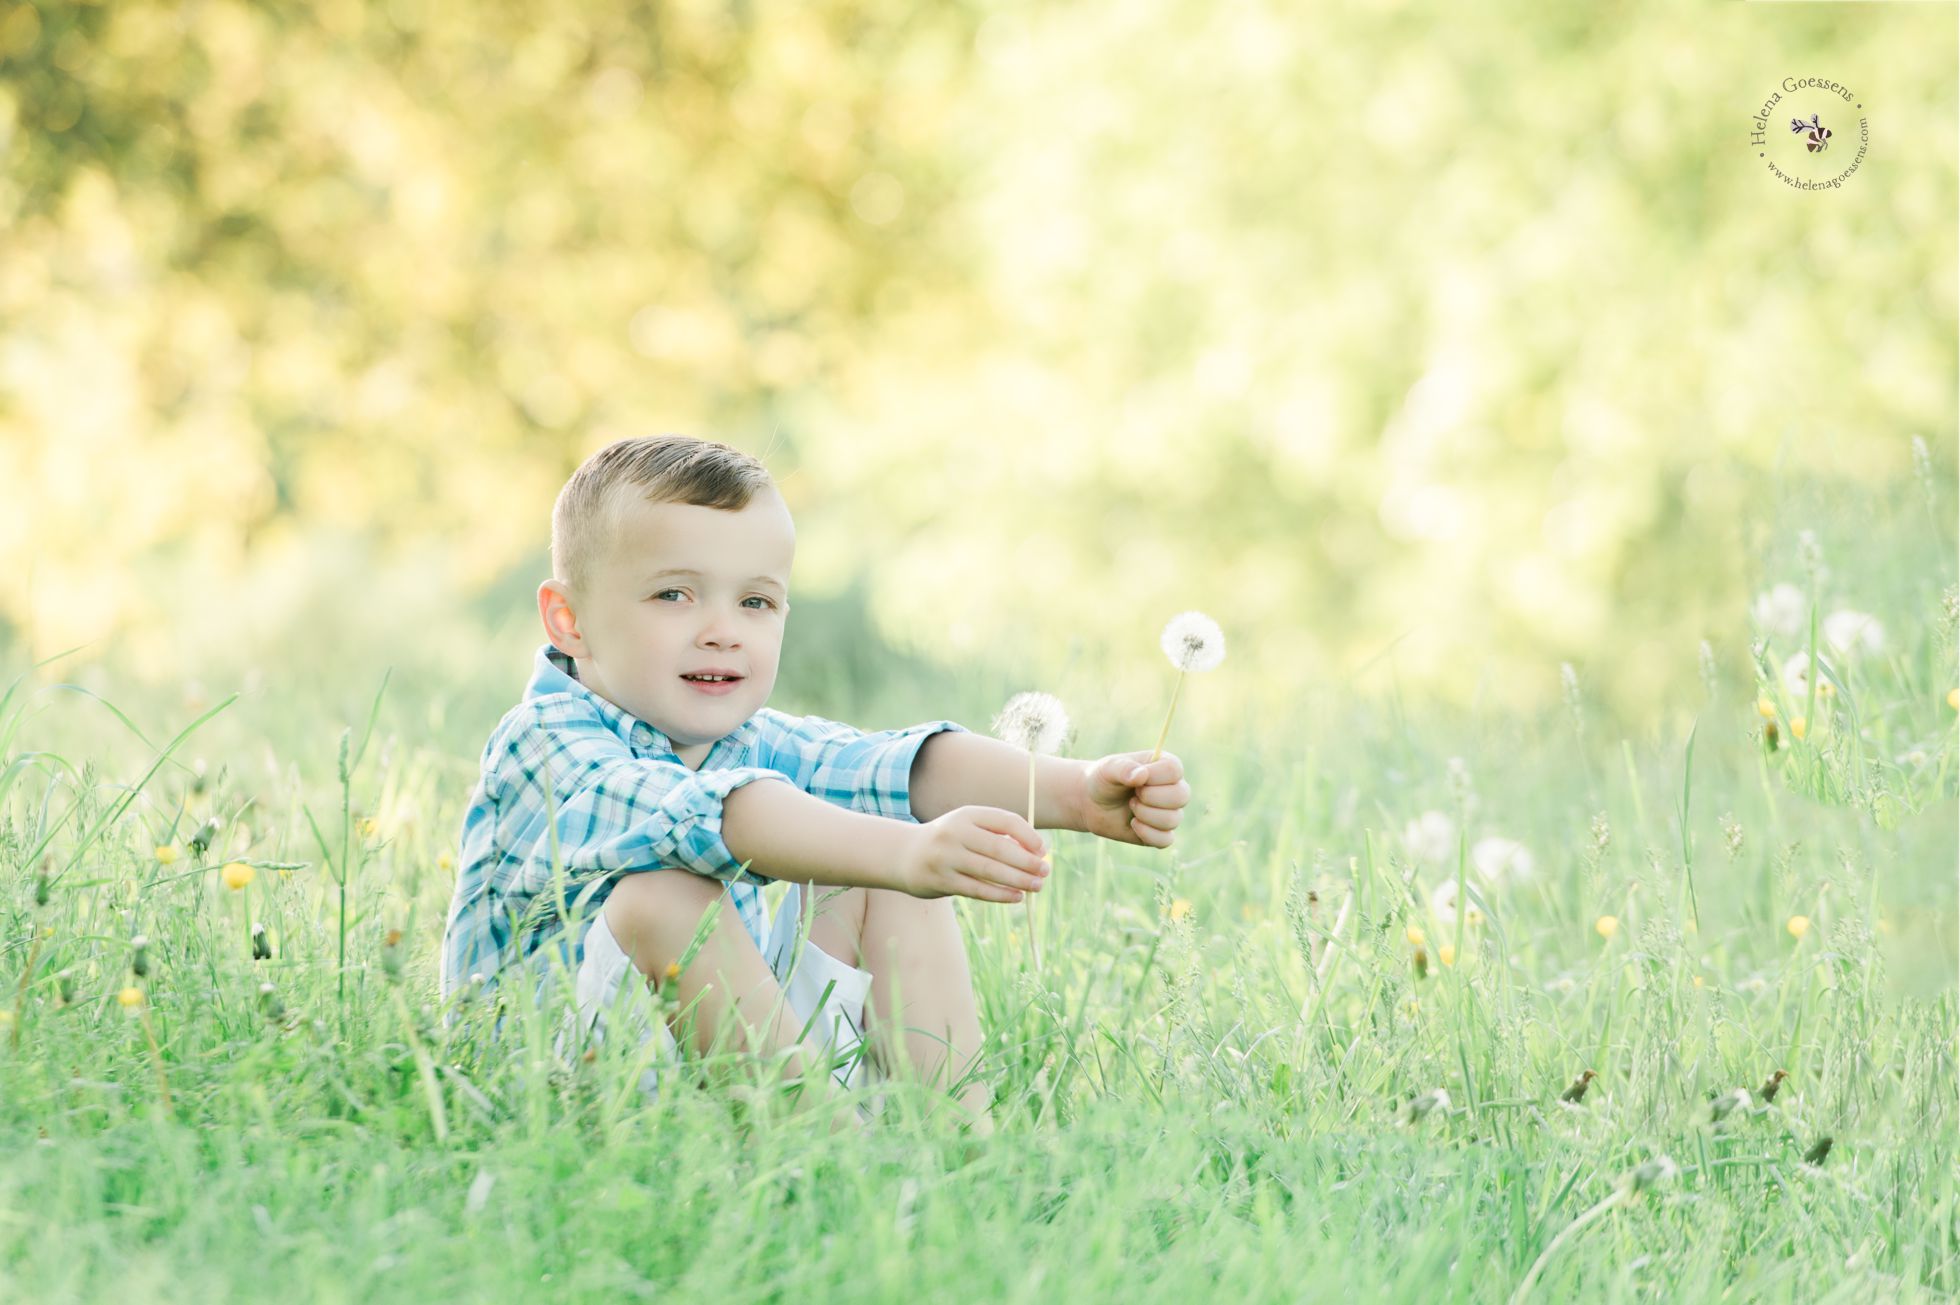 boy sitting on the grass wearing a blue shirt and holding two dandelions